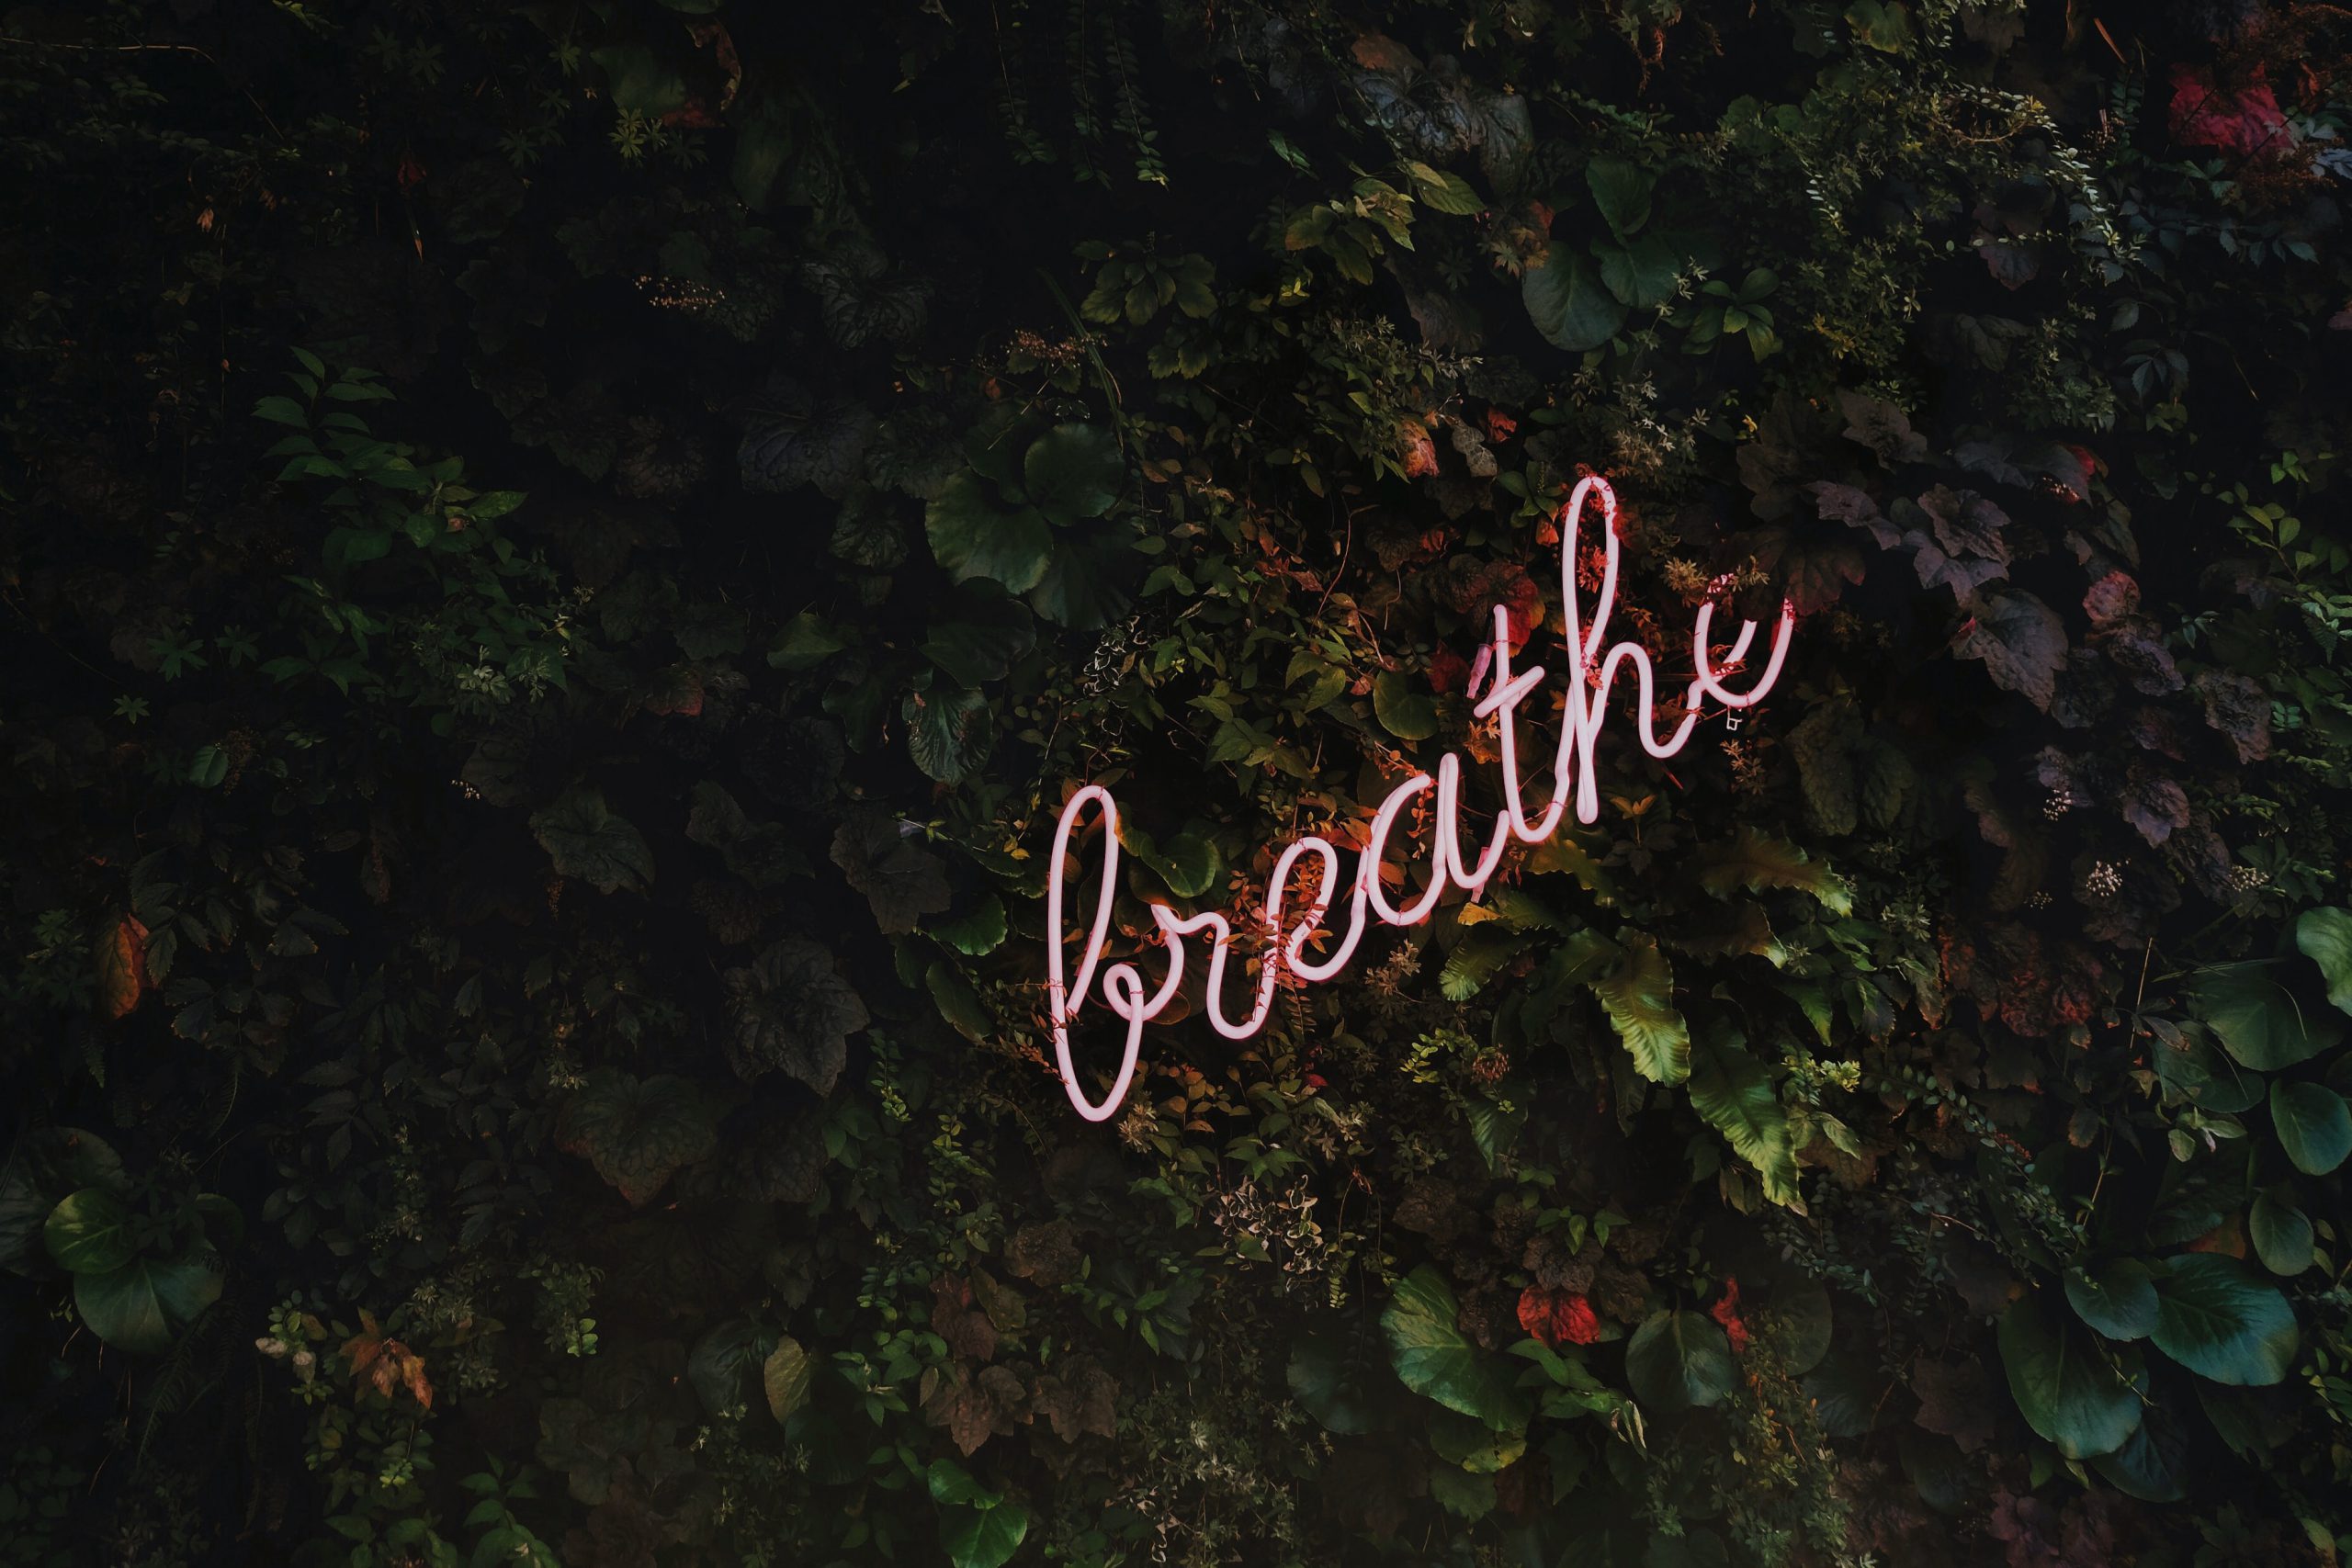 pink-neon-breath-4-steps-to-break-the-anxiety-cycle